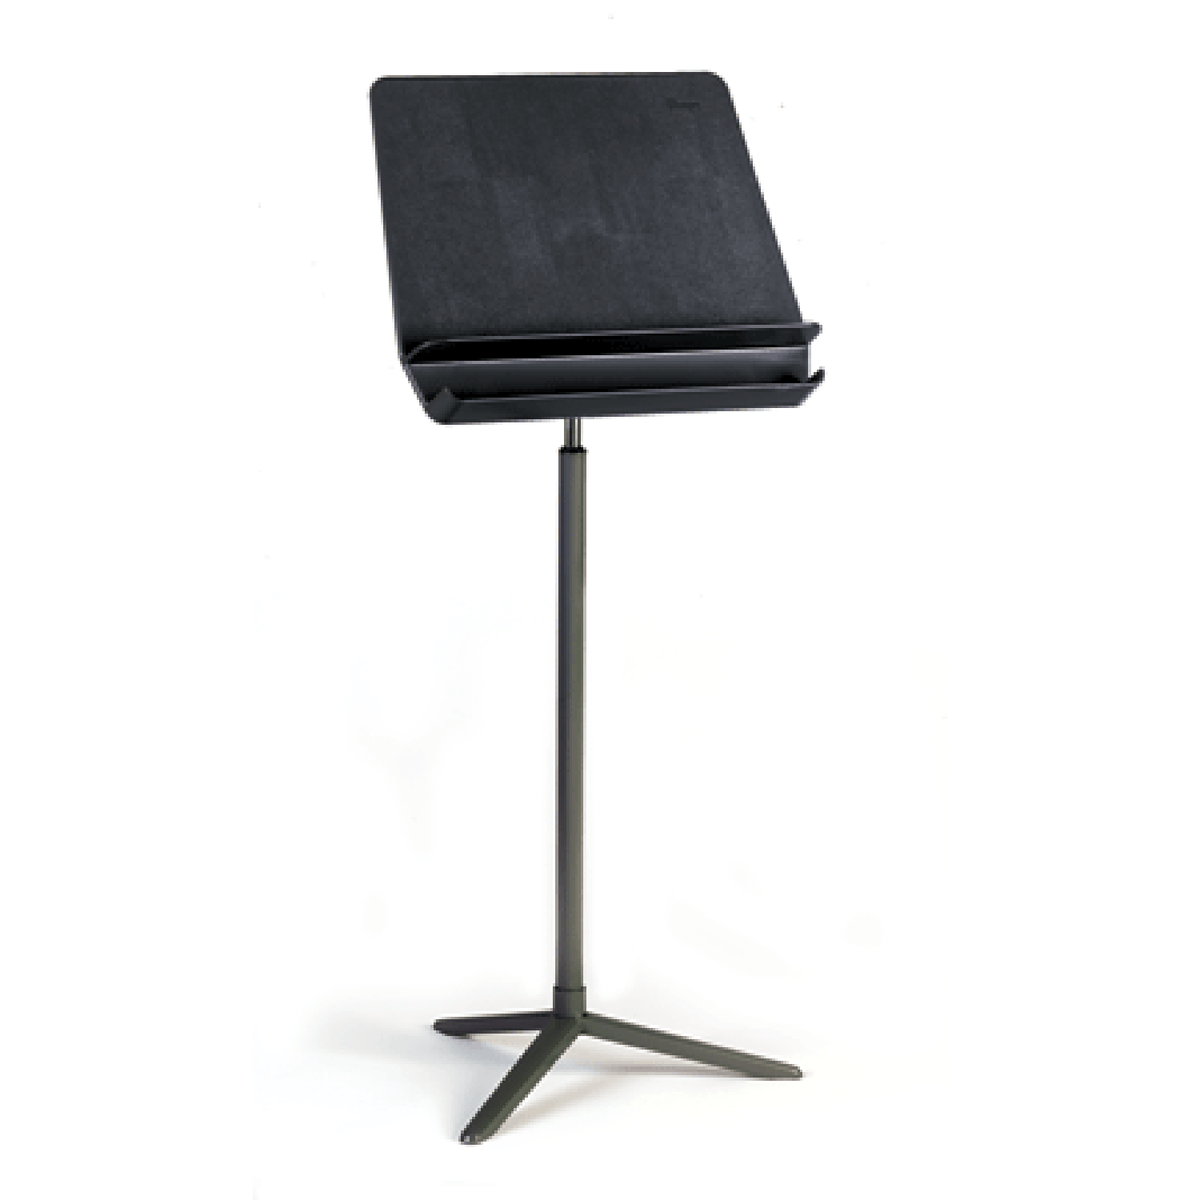 Wenger - Bravo Sheet Music Stands-Music Stand-Wenger-Black-Music Elements